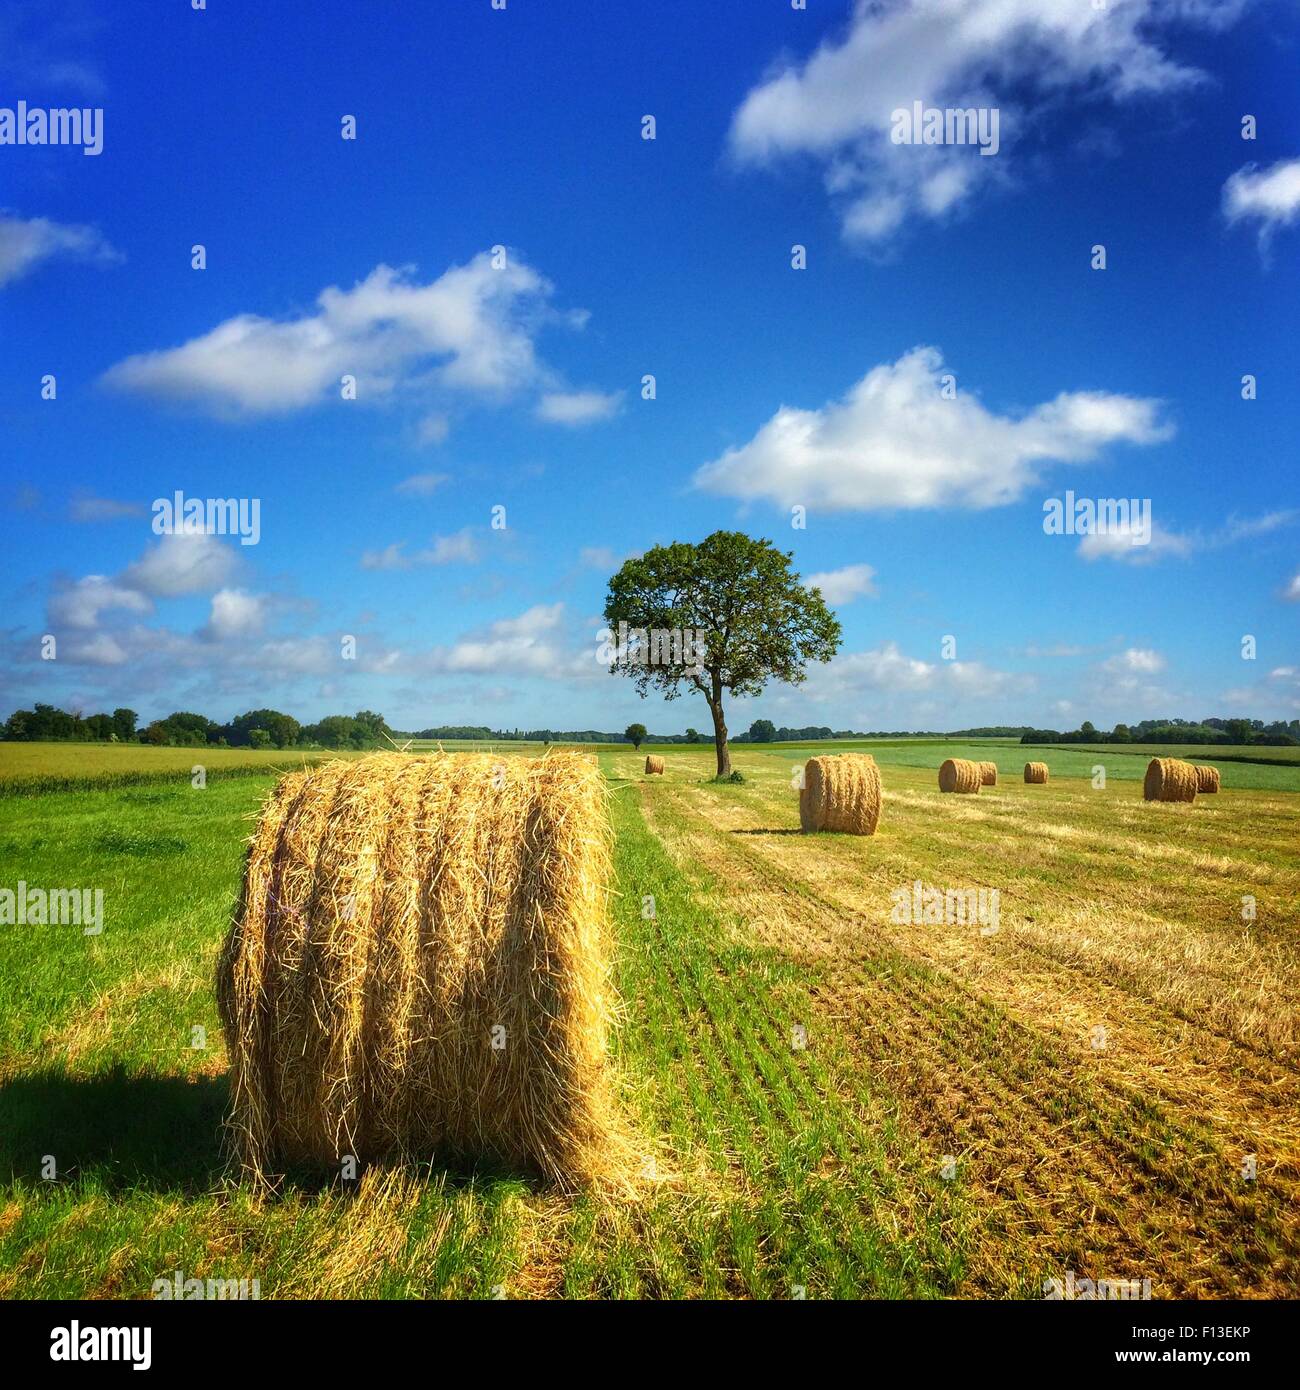 Hay bales in a field, Poitou-Charentes, France Stock Photo